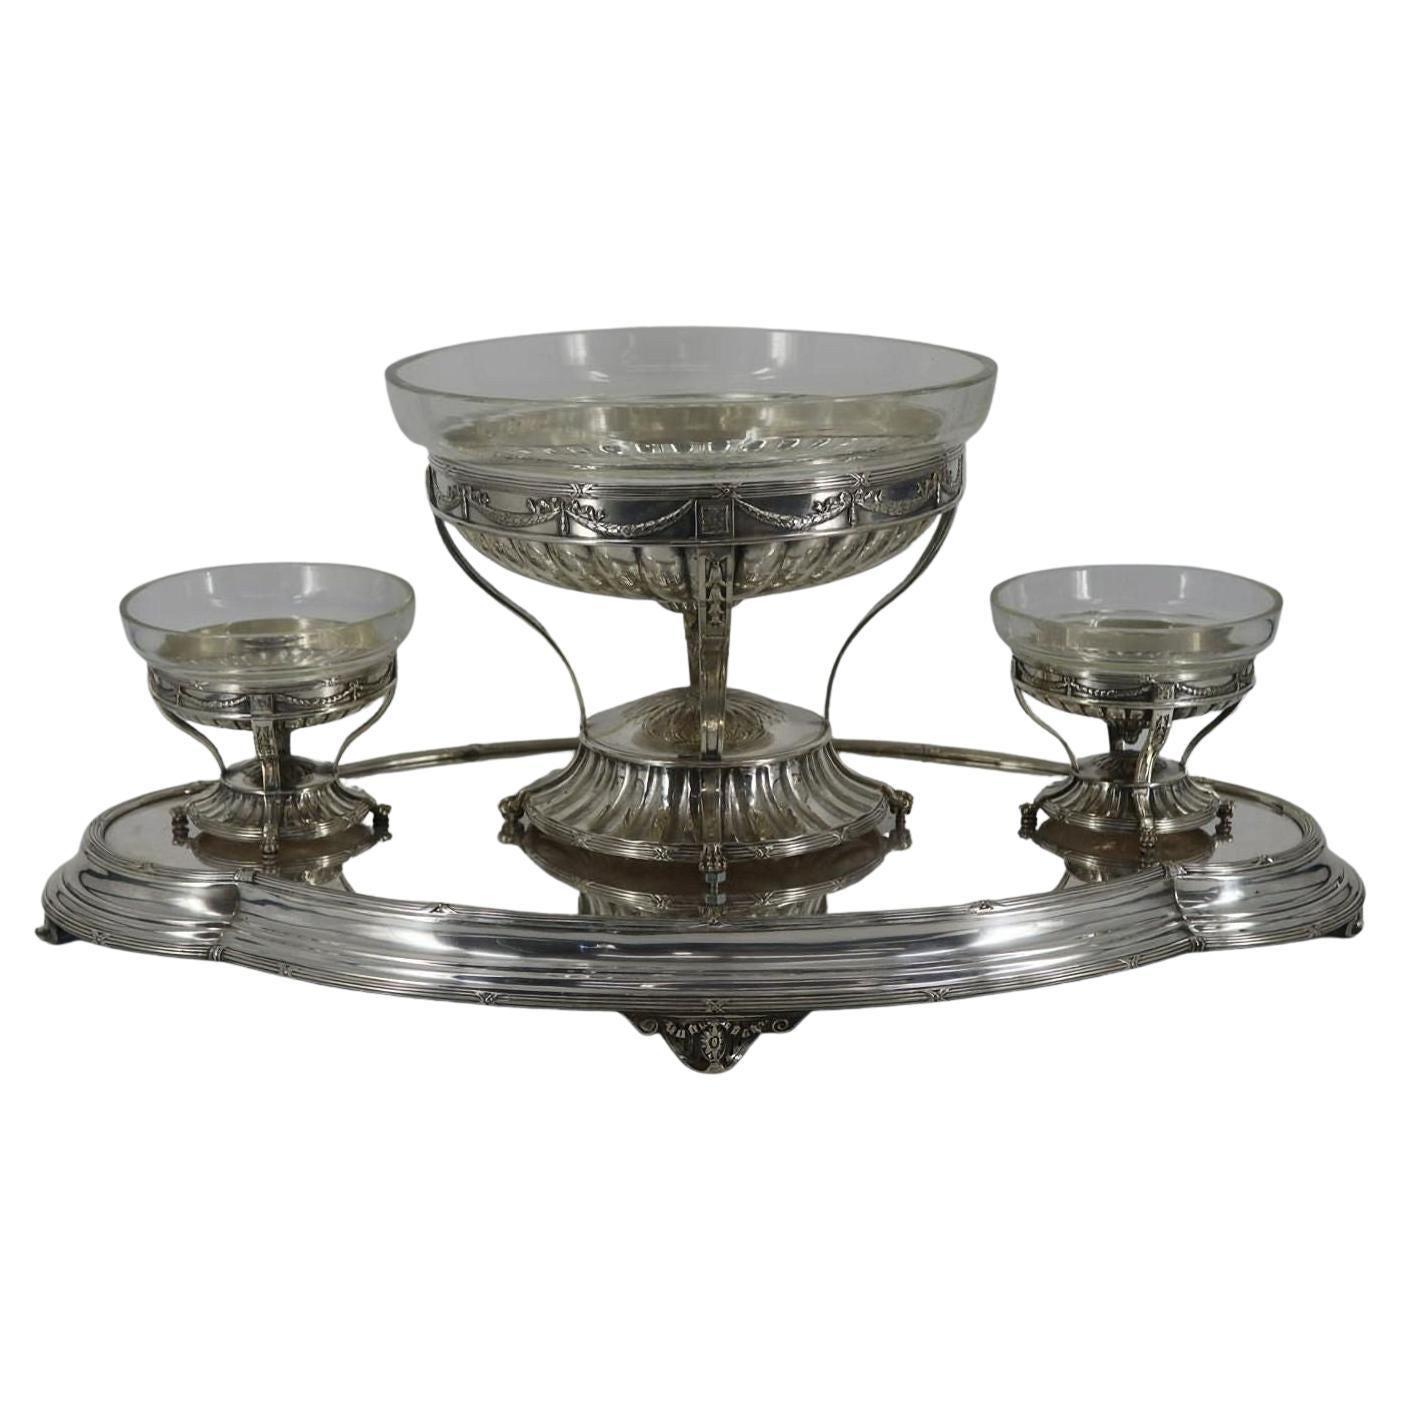 Our large silverplate tray from Elkington and Co. features three footed pedestal bowls with glass liners. Bowls have pegs to the undersides of each foot that fit into the base. Underside stamped with the Elkington marks including W year code for